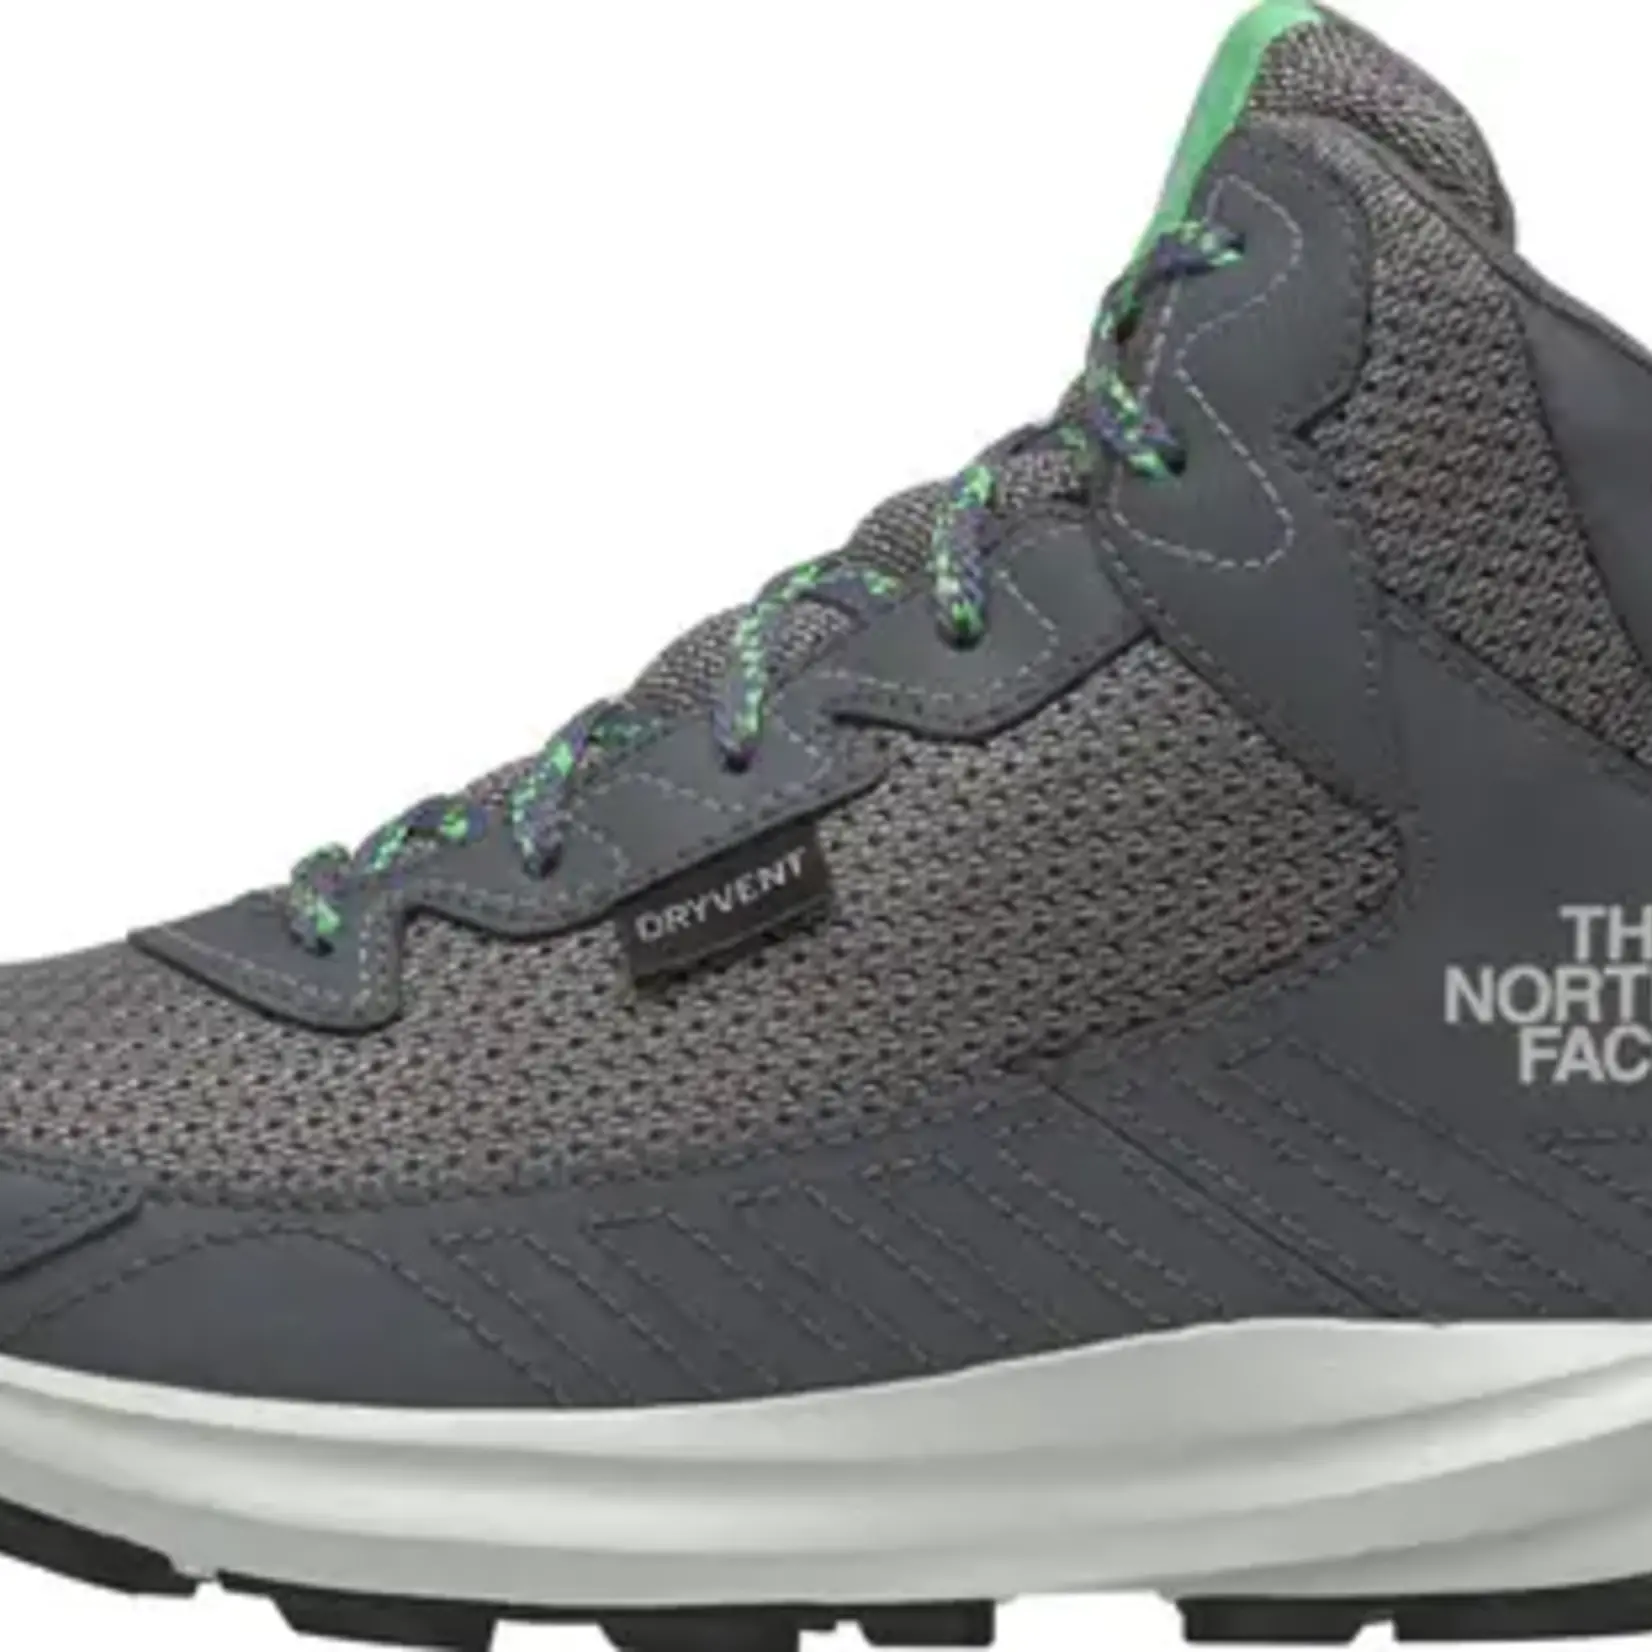 THE NORTH FACE NORTH FACE YOUTH FASTPACK HIKER MID WP